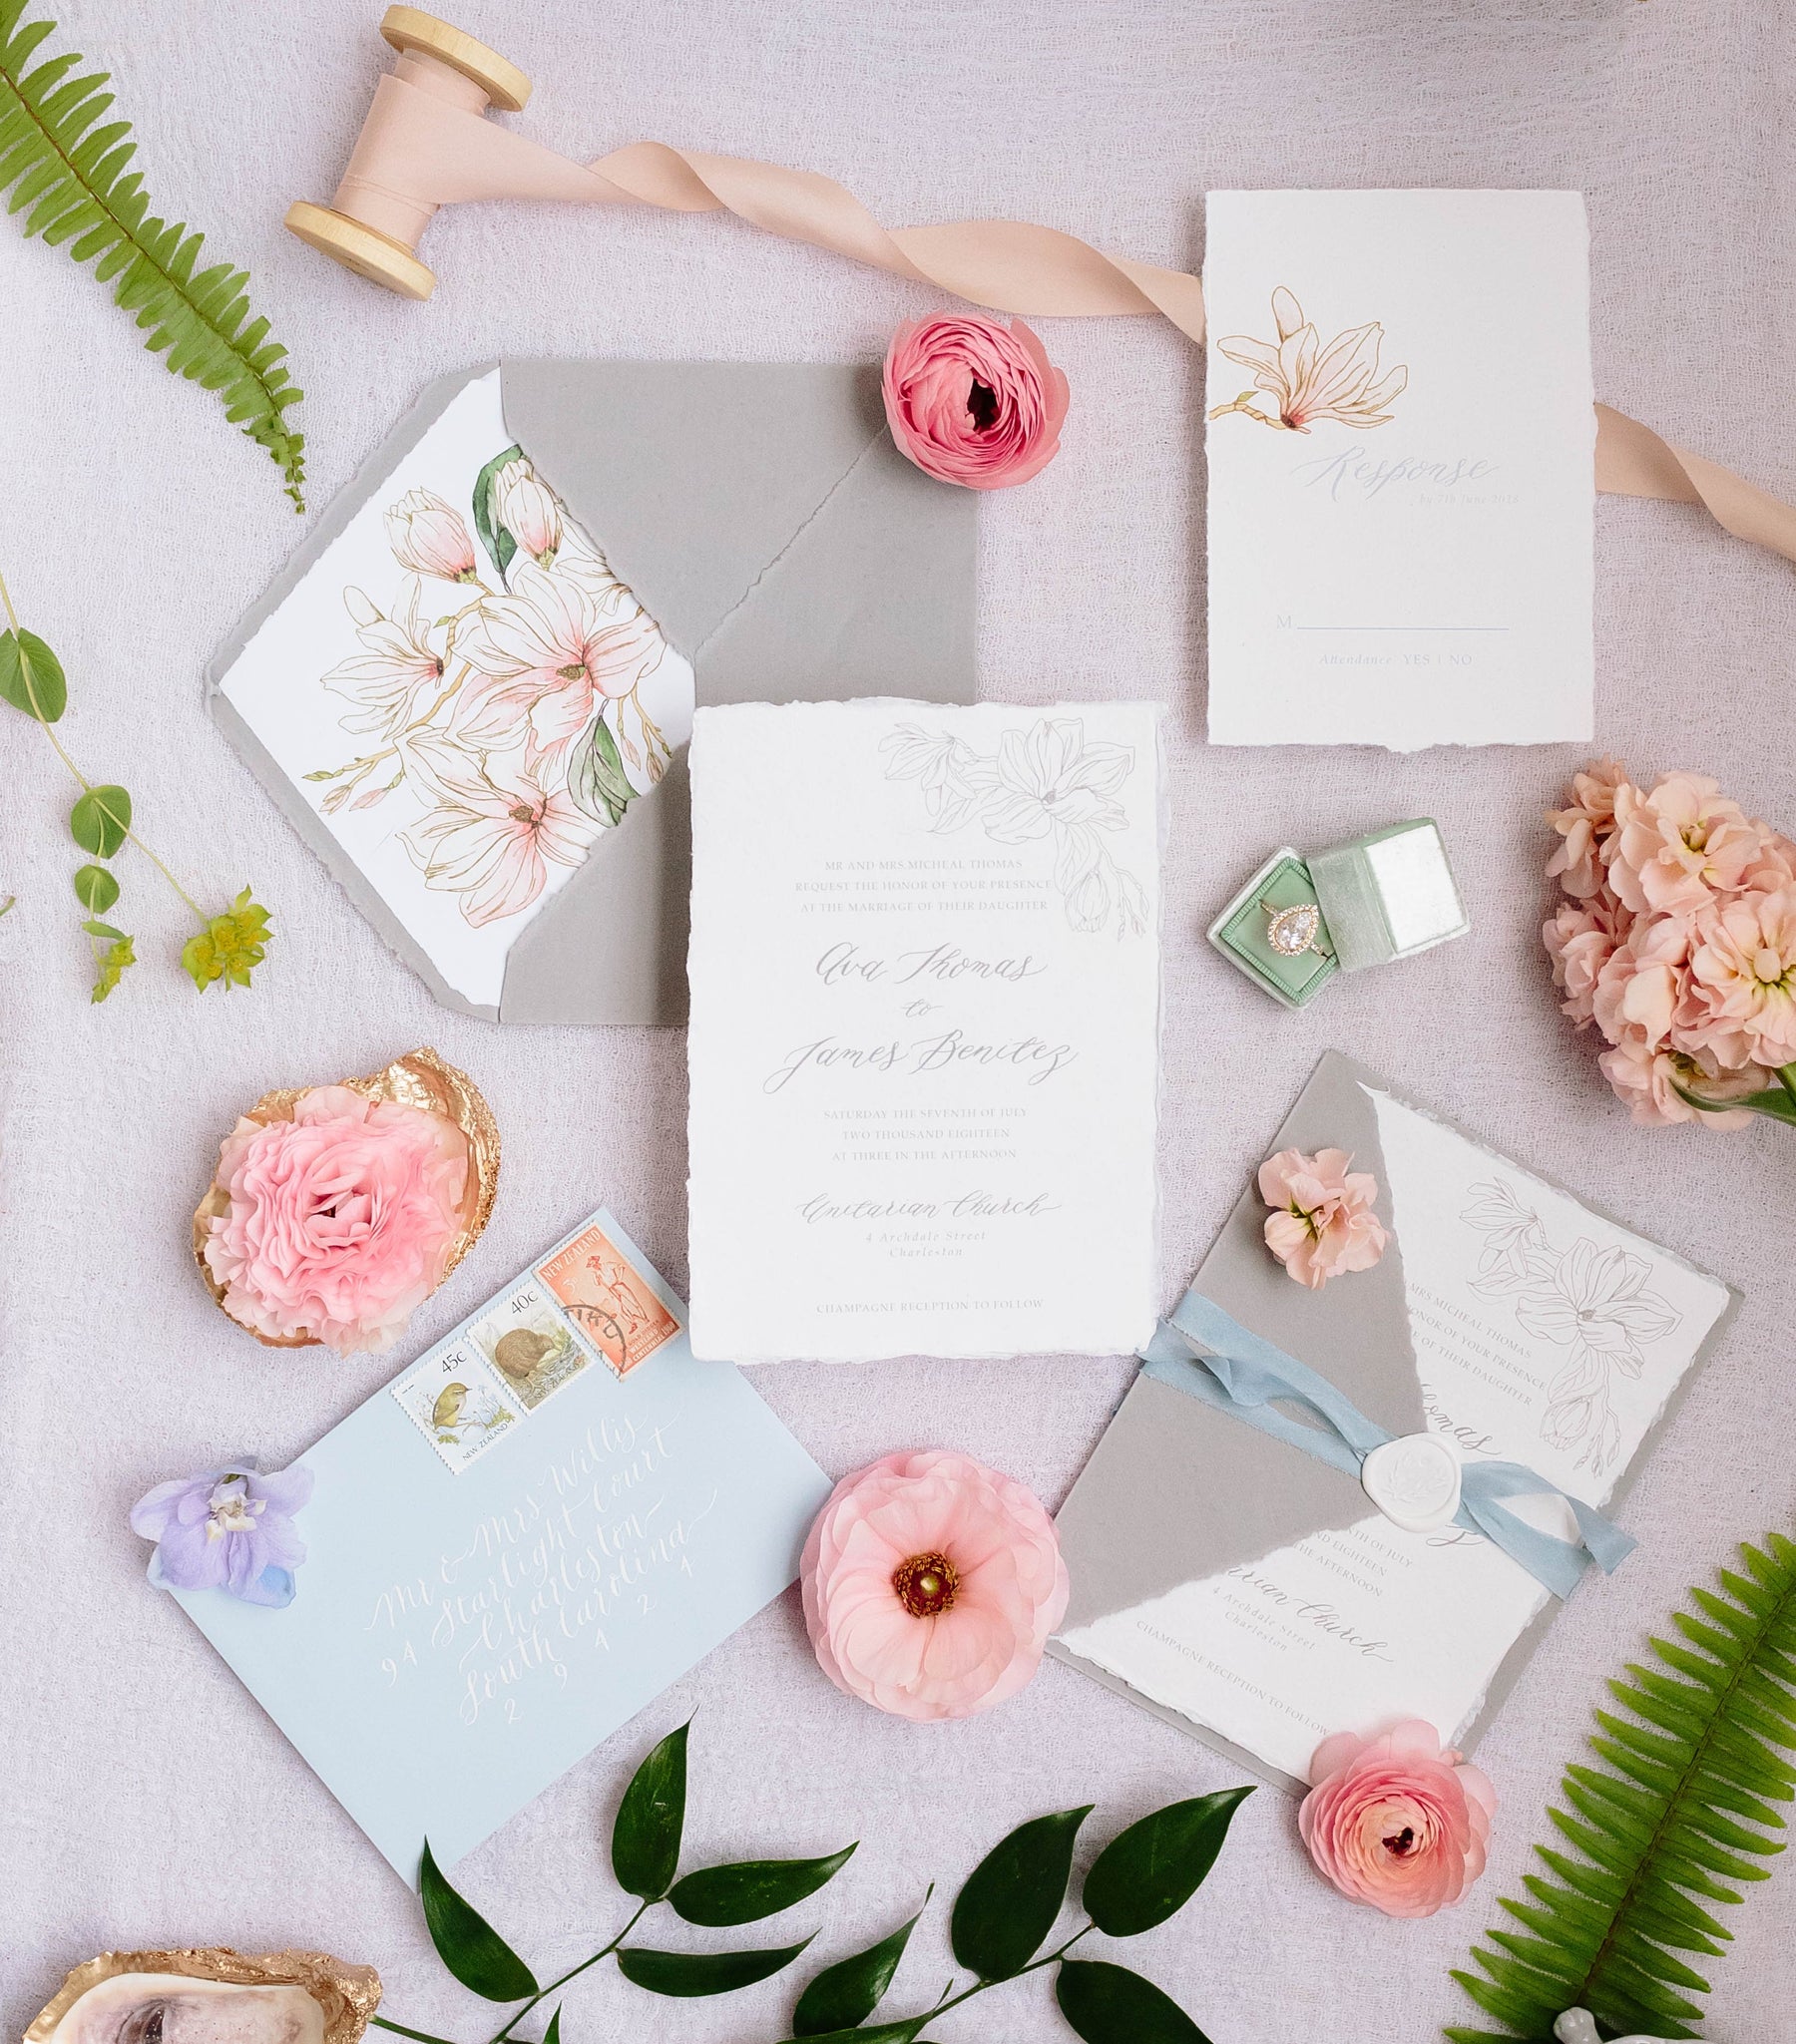 Vendor Feature | Inkberry Calligraphy - Feathers and Stone